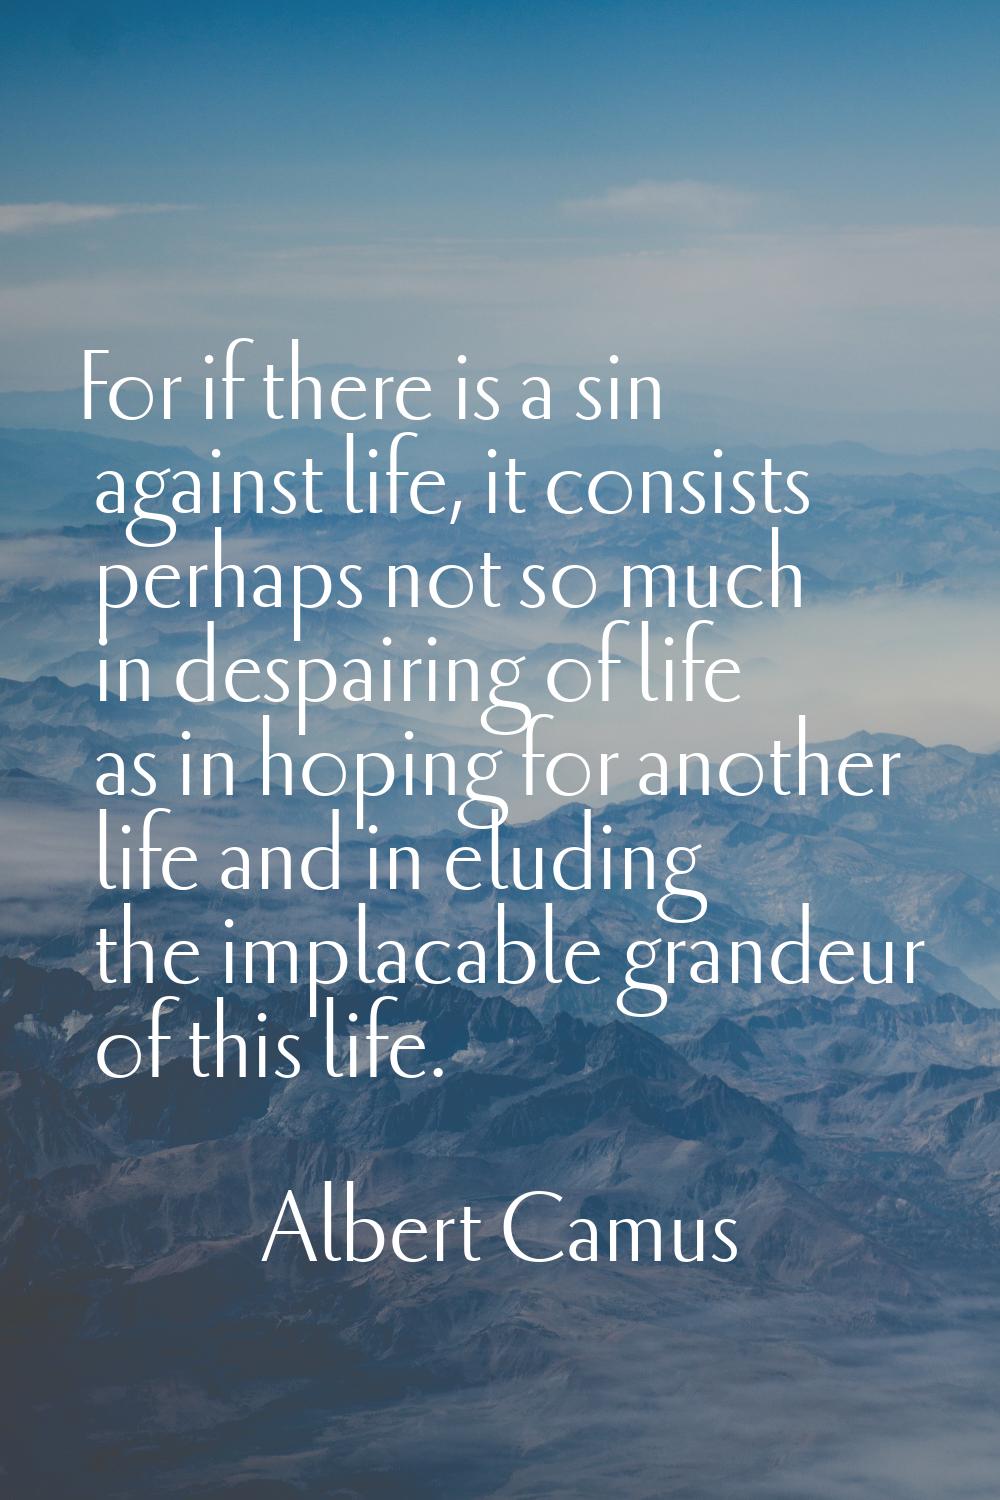 For if there is a sin against life, it consists perhaps not so much in despairing of life as in hop